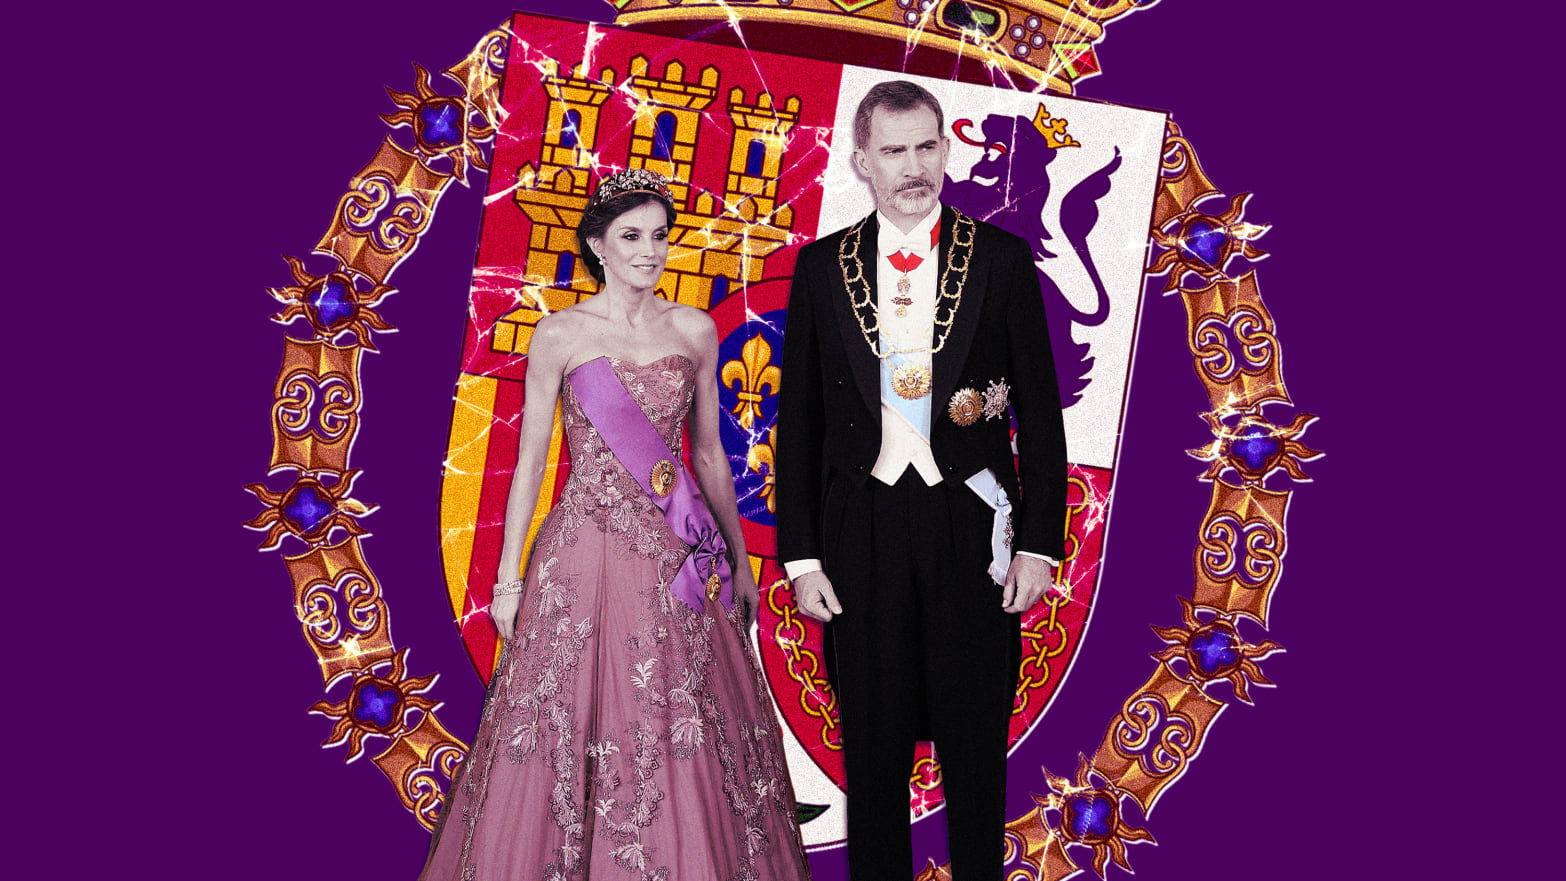 A photo illustration of King Felipe and Queen Letizia.